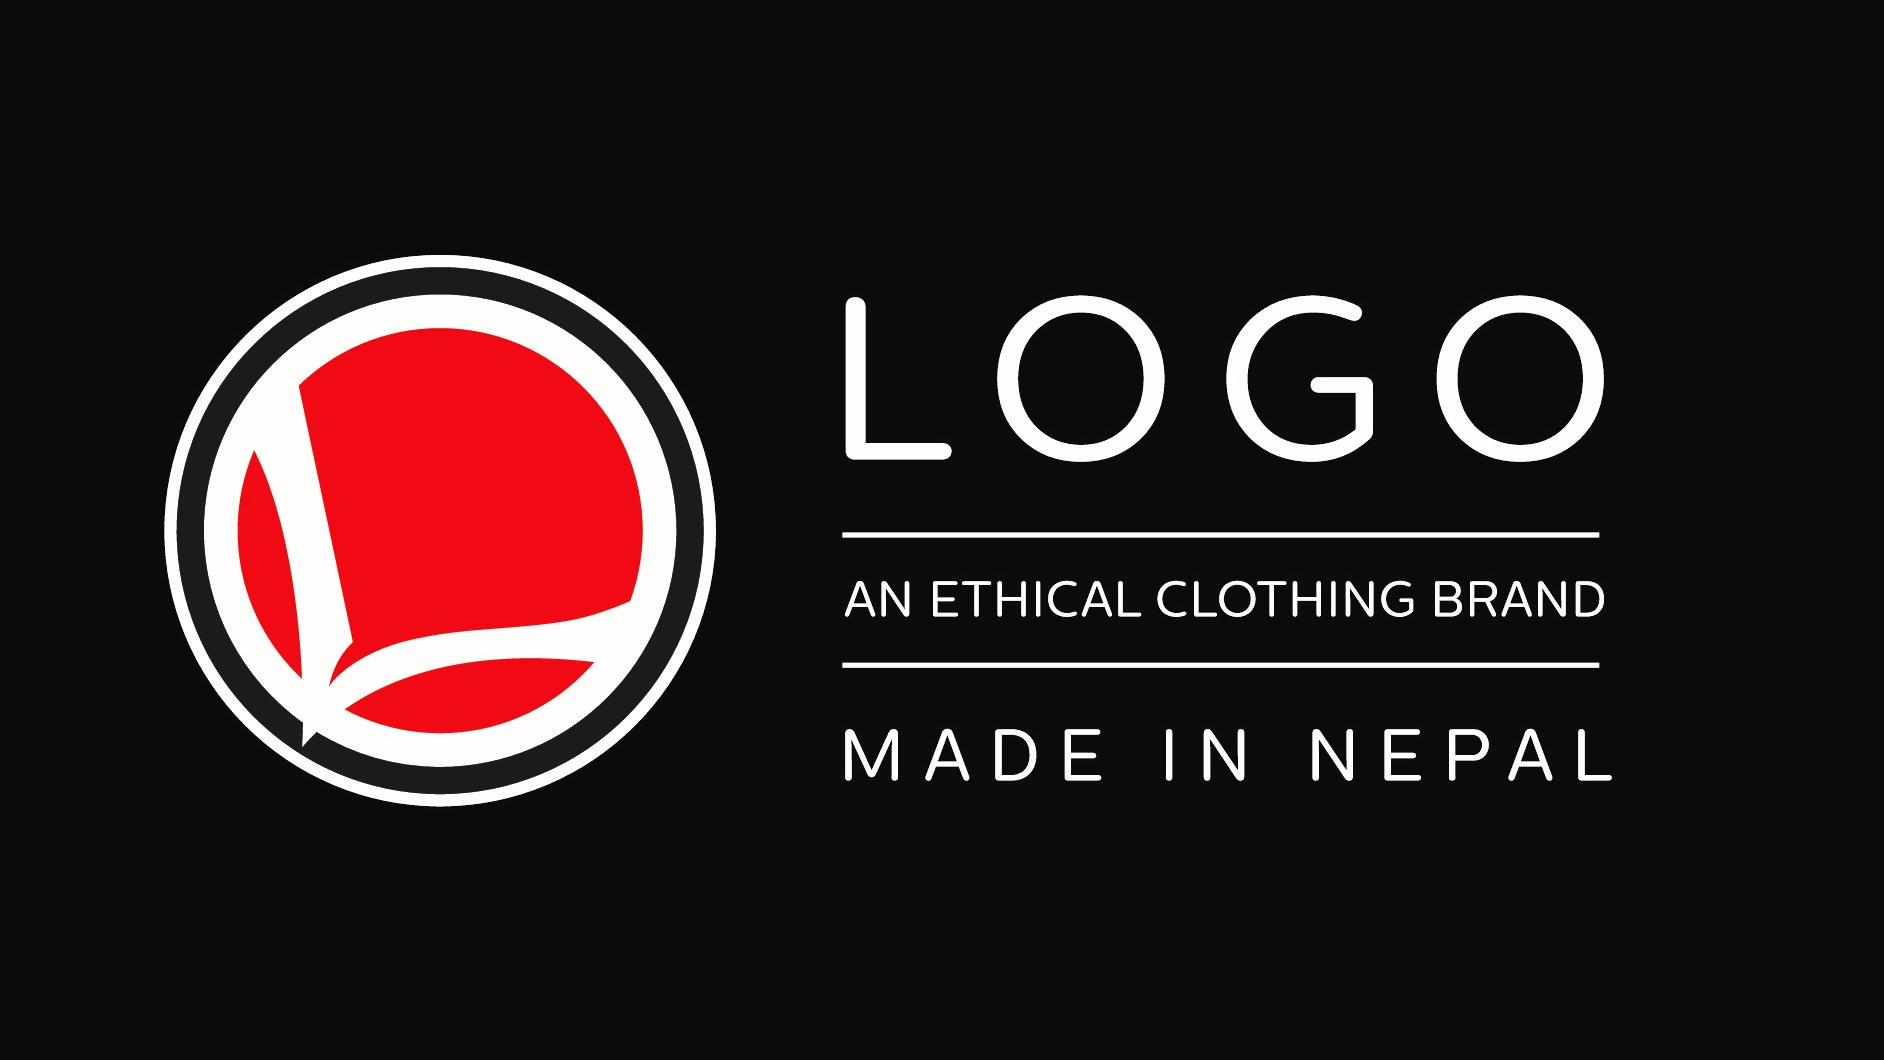 LOGO, Ethical Clothing Brand. Made In Nepal